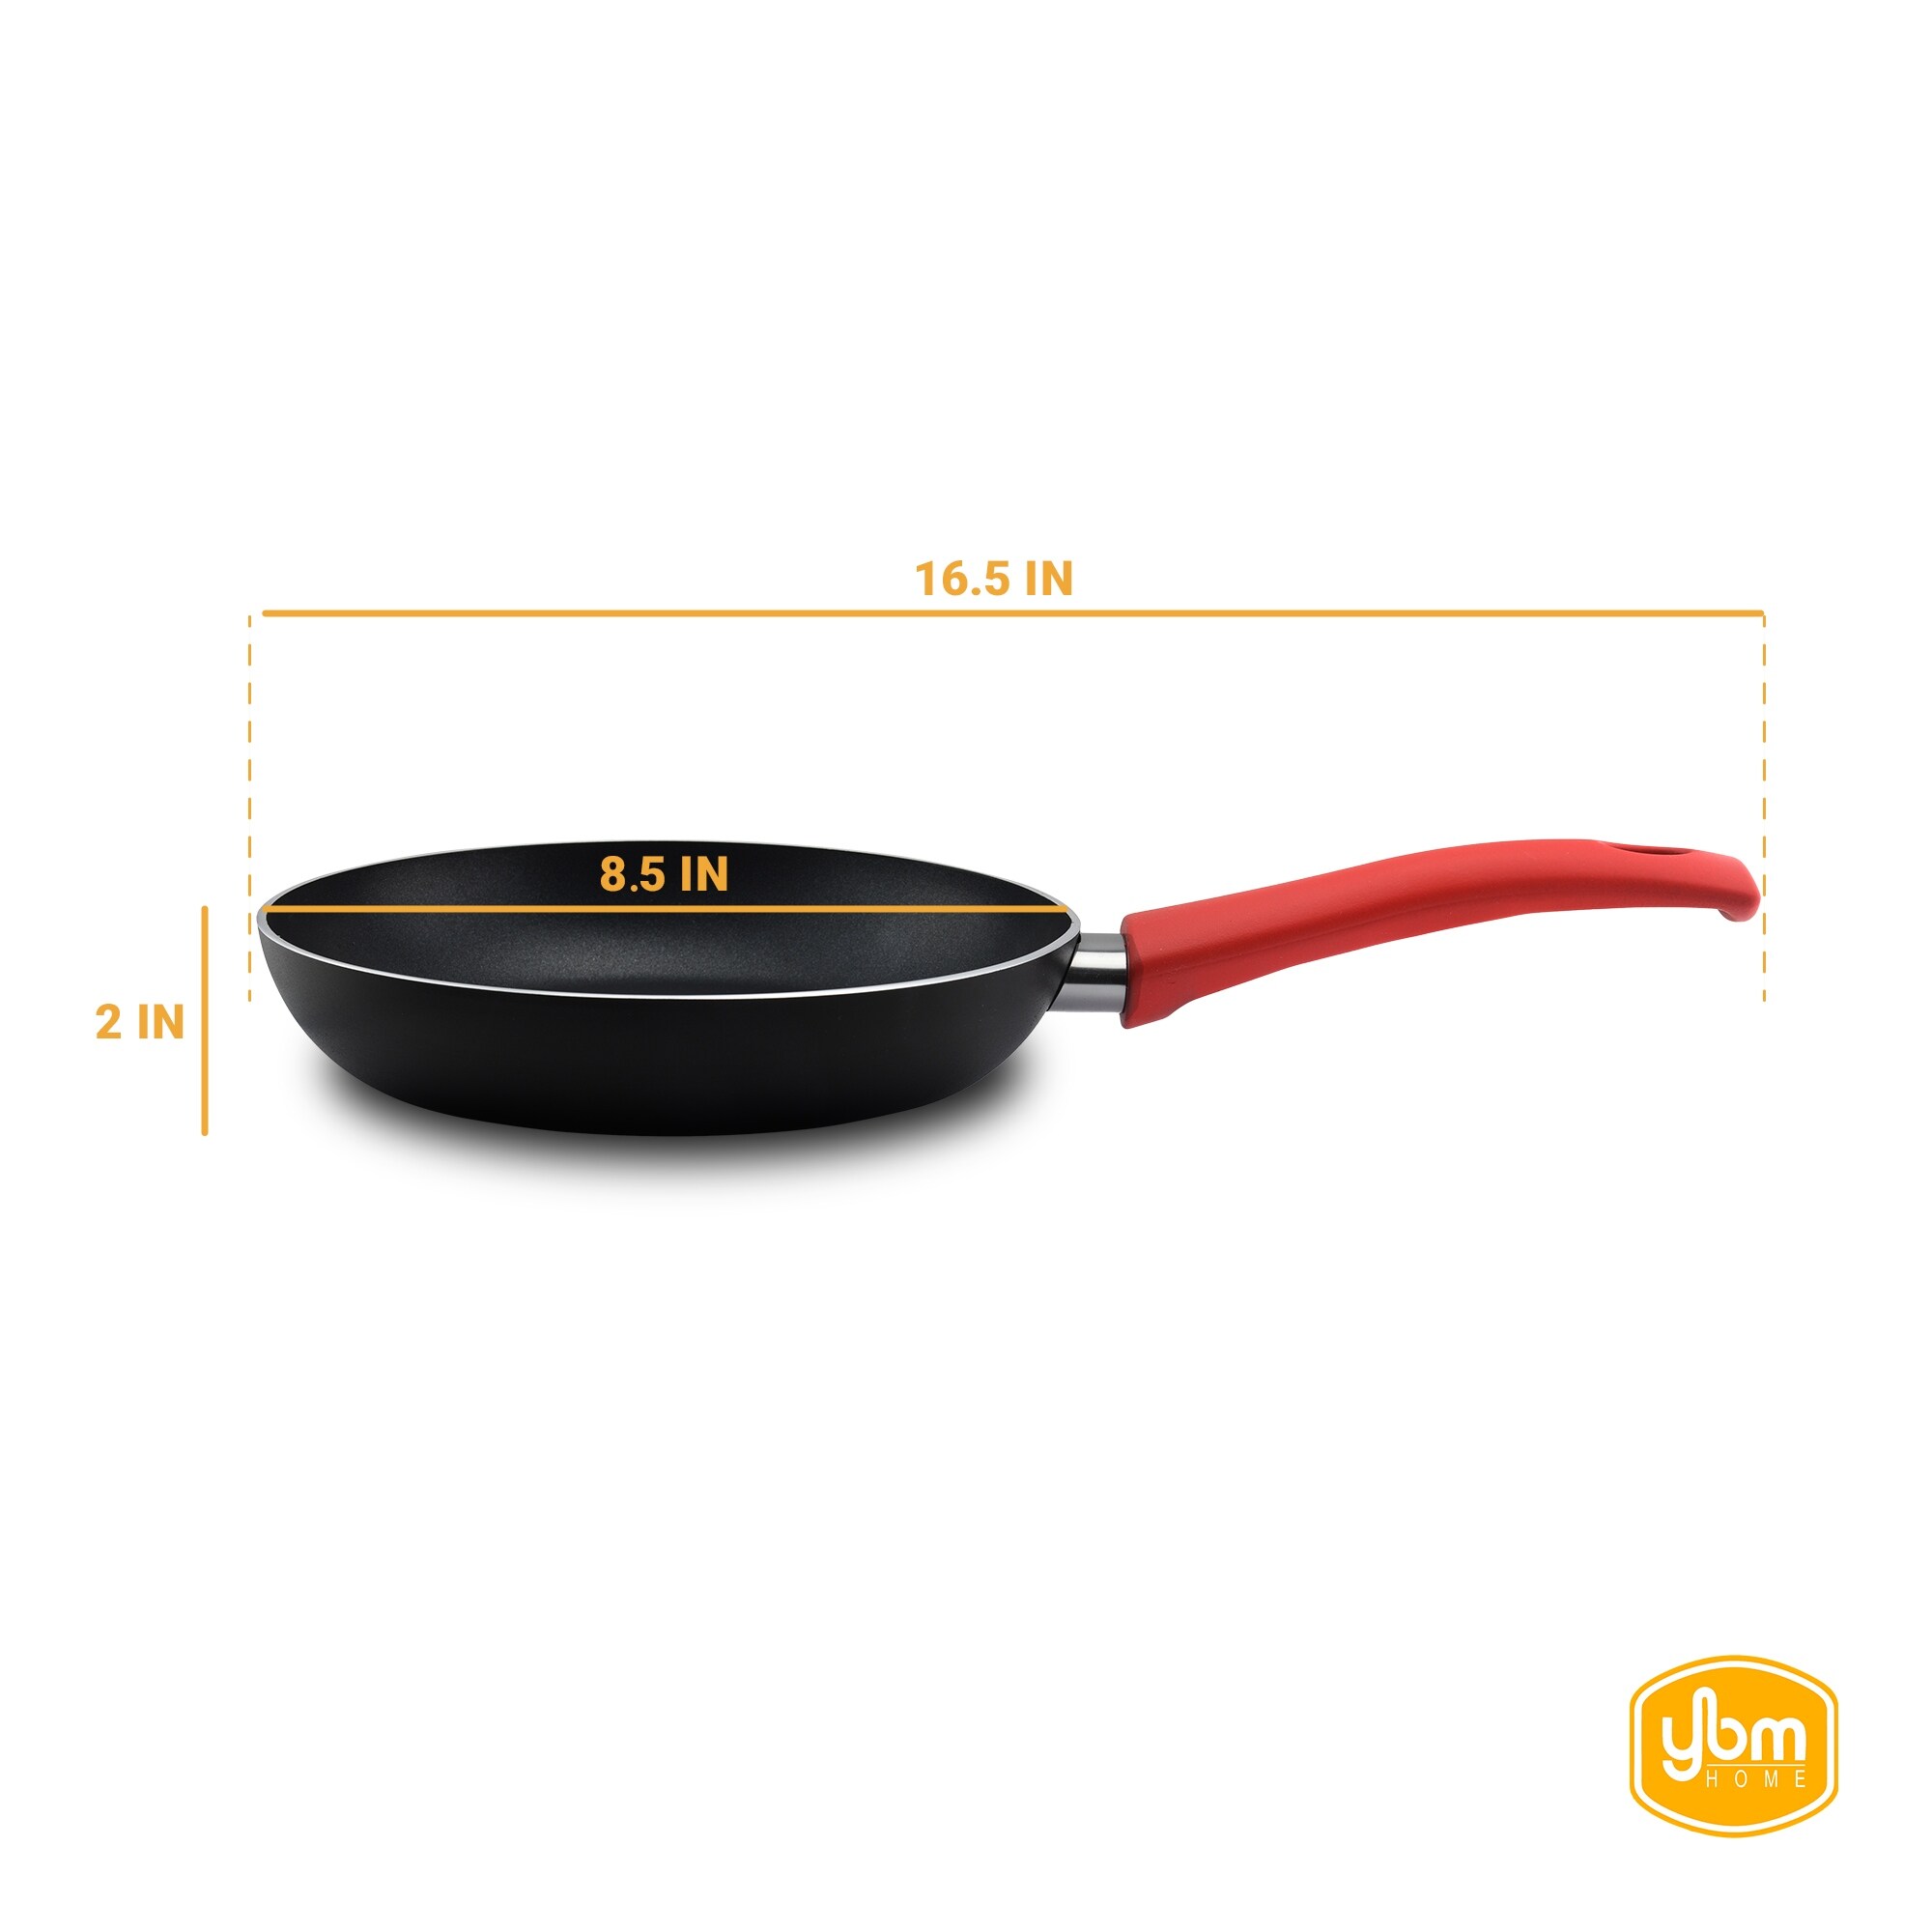 https://ak1.ostkcdn.com/images/products/is/images/direct/a4c88abbd7ae49e1673a9d44b5c032e2e24cb01e/Ybm-Home-Teflon-Classic-Non-Stick-Frying-Pan-Skillet-for-Omelet.jpg